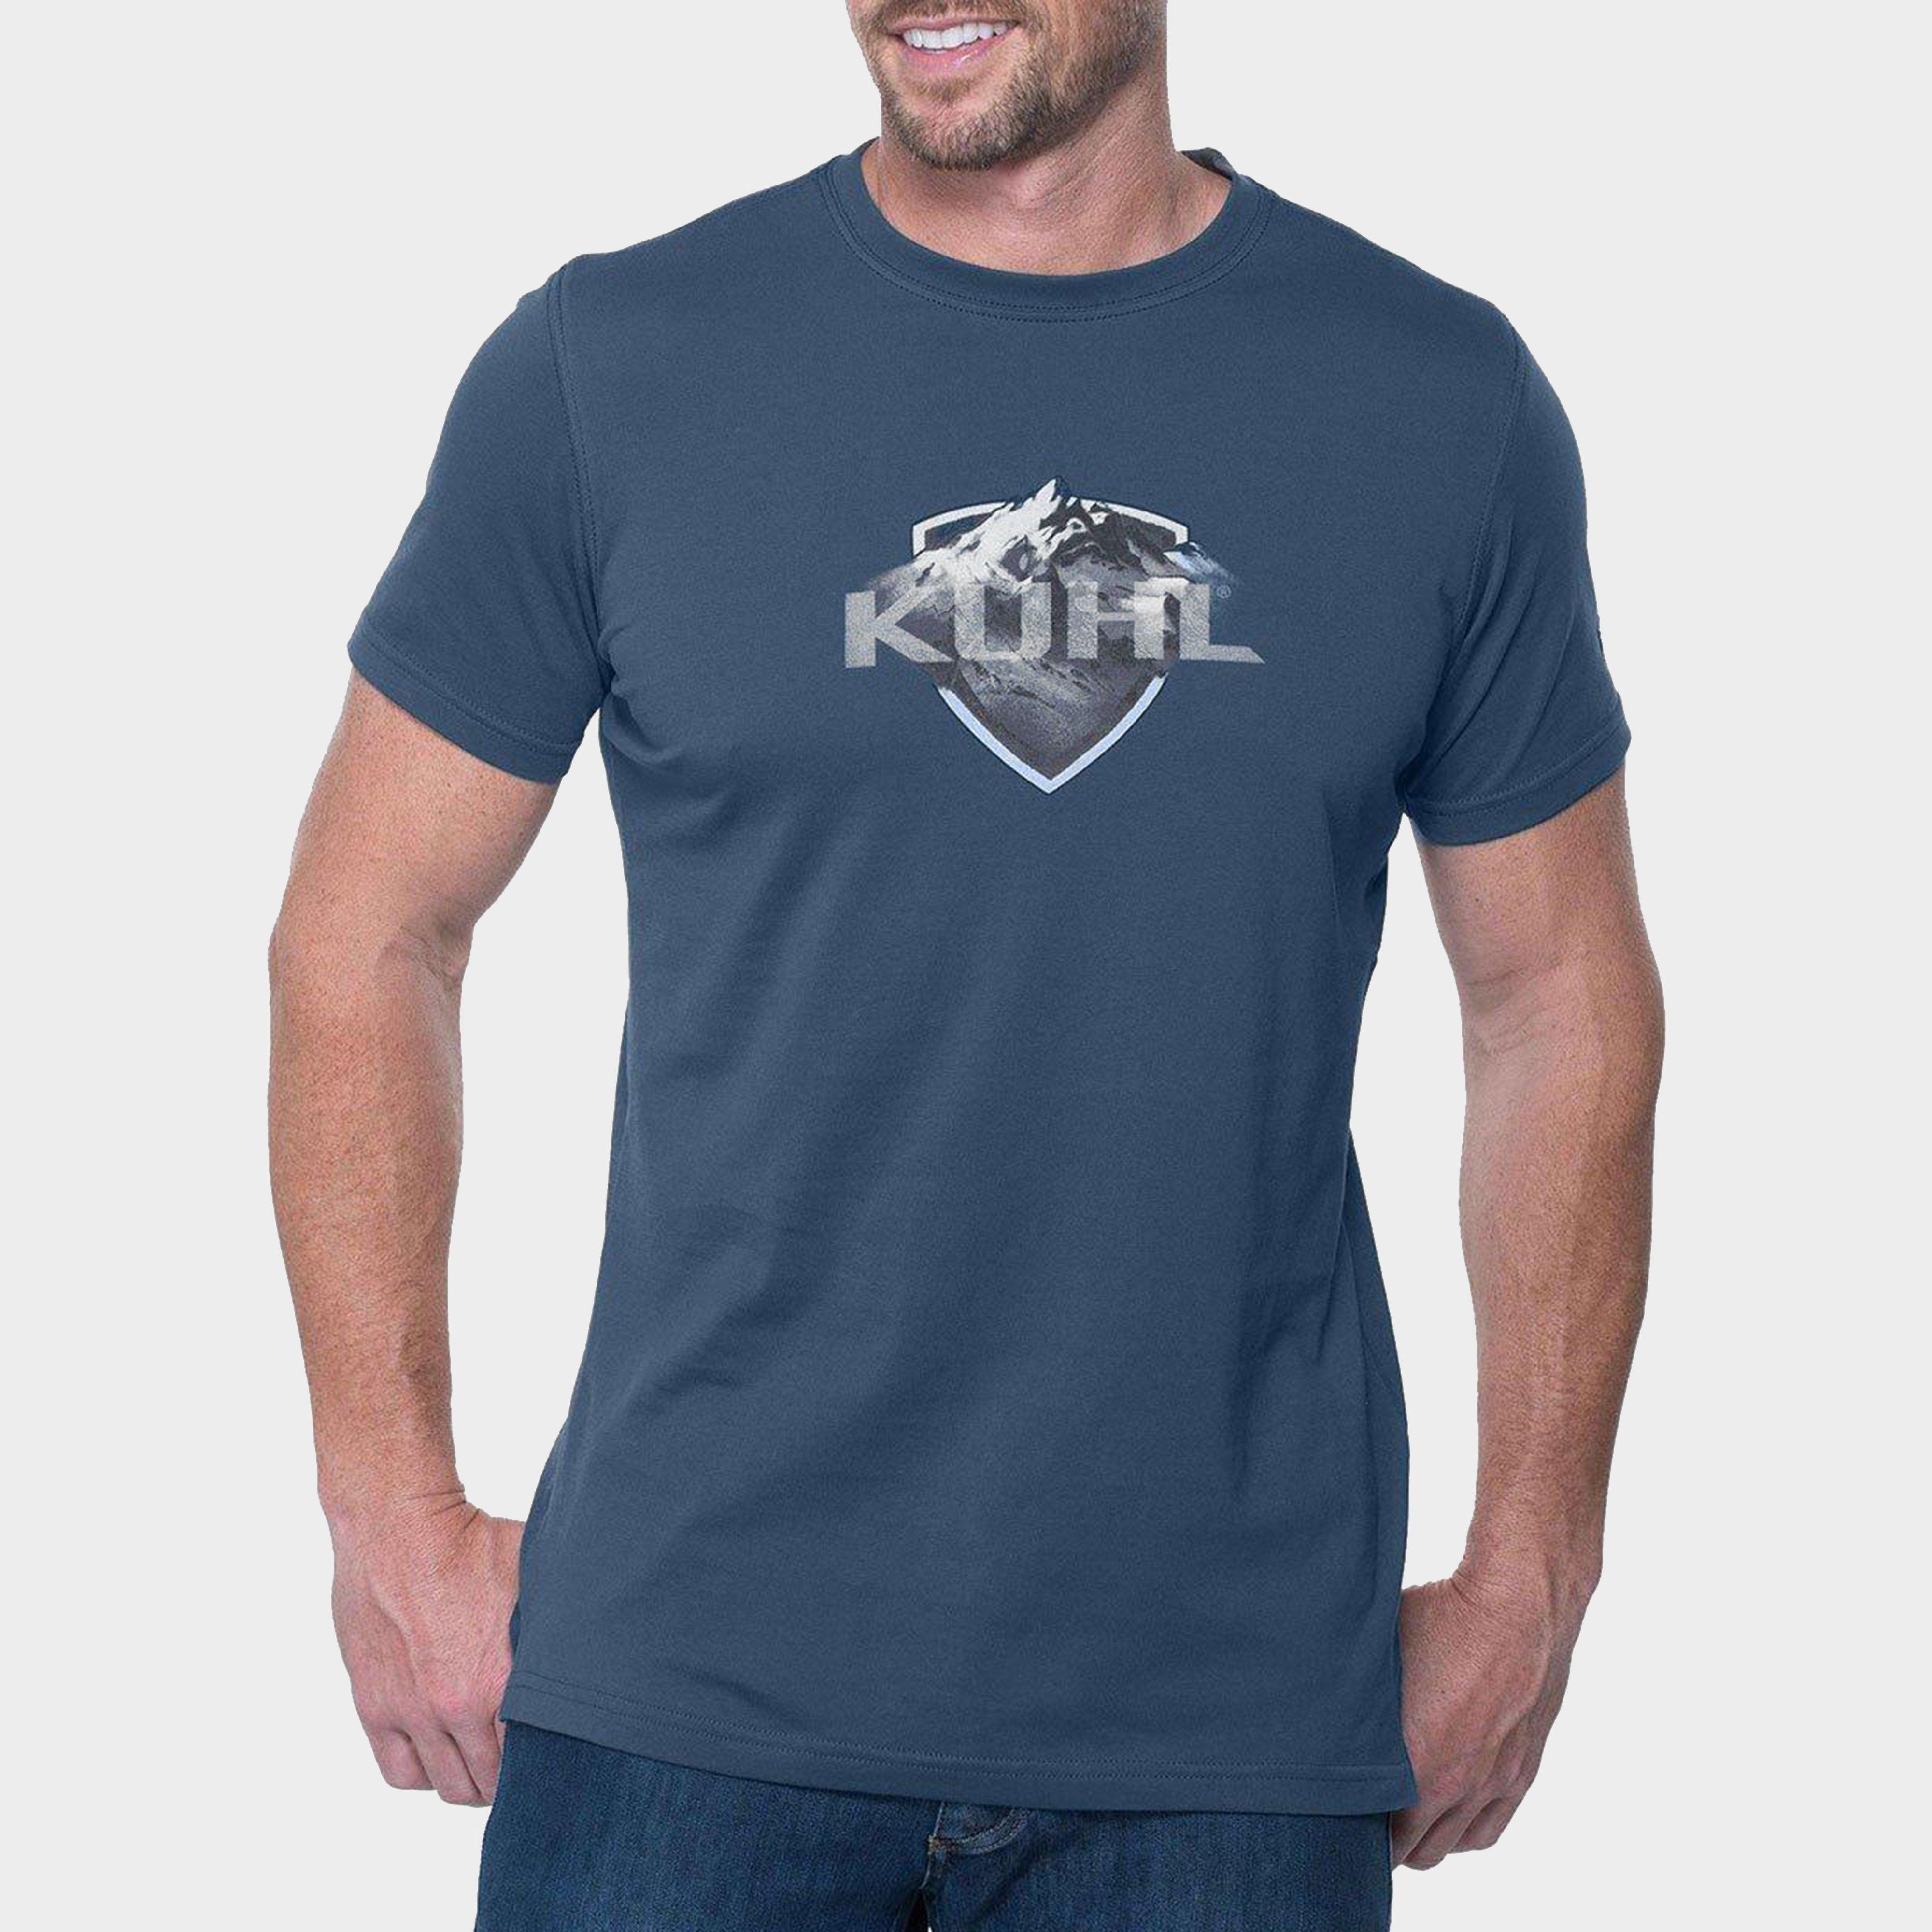 Kuhl Mens Born In The Mountains Tee - Navy/nvy  Navy/nvy